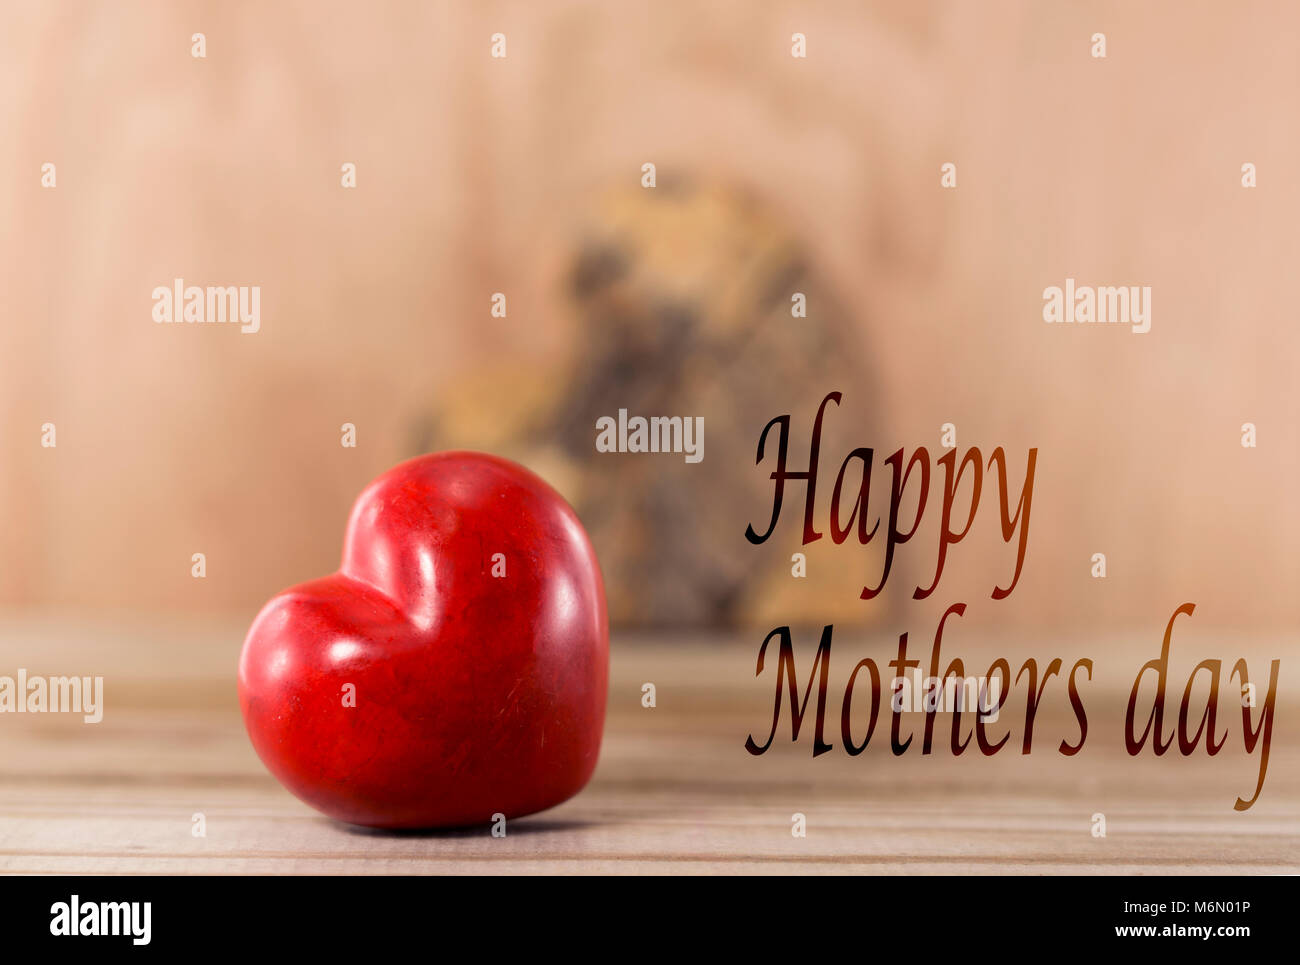 happy mothers day Stock Photo